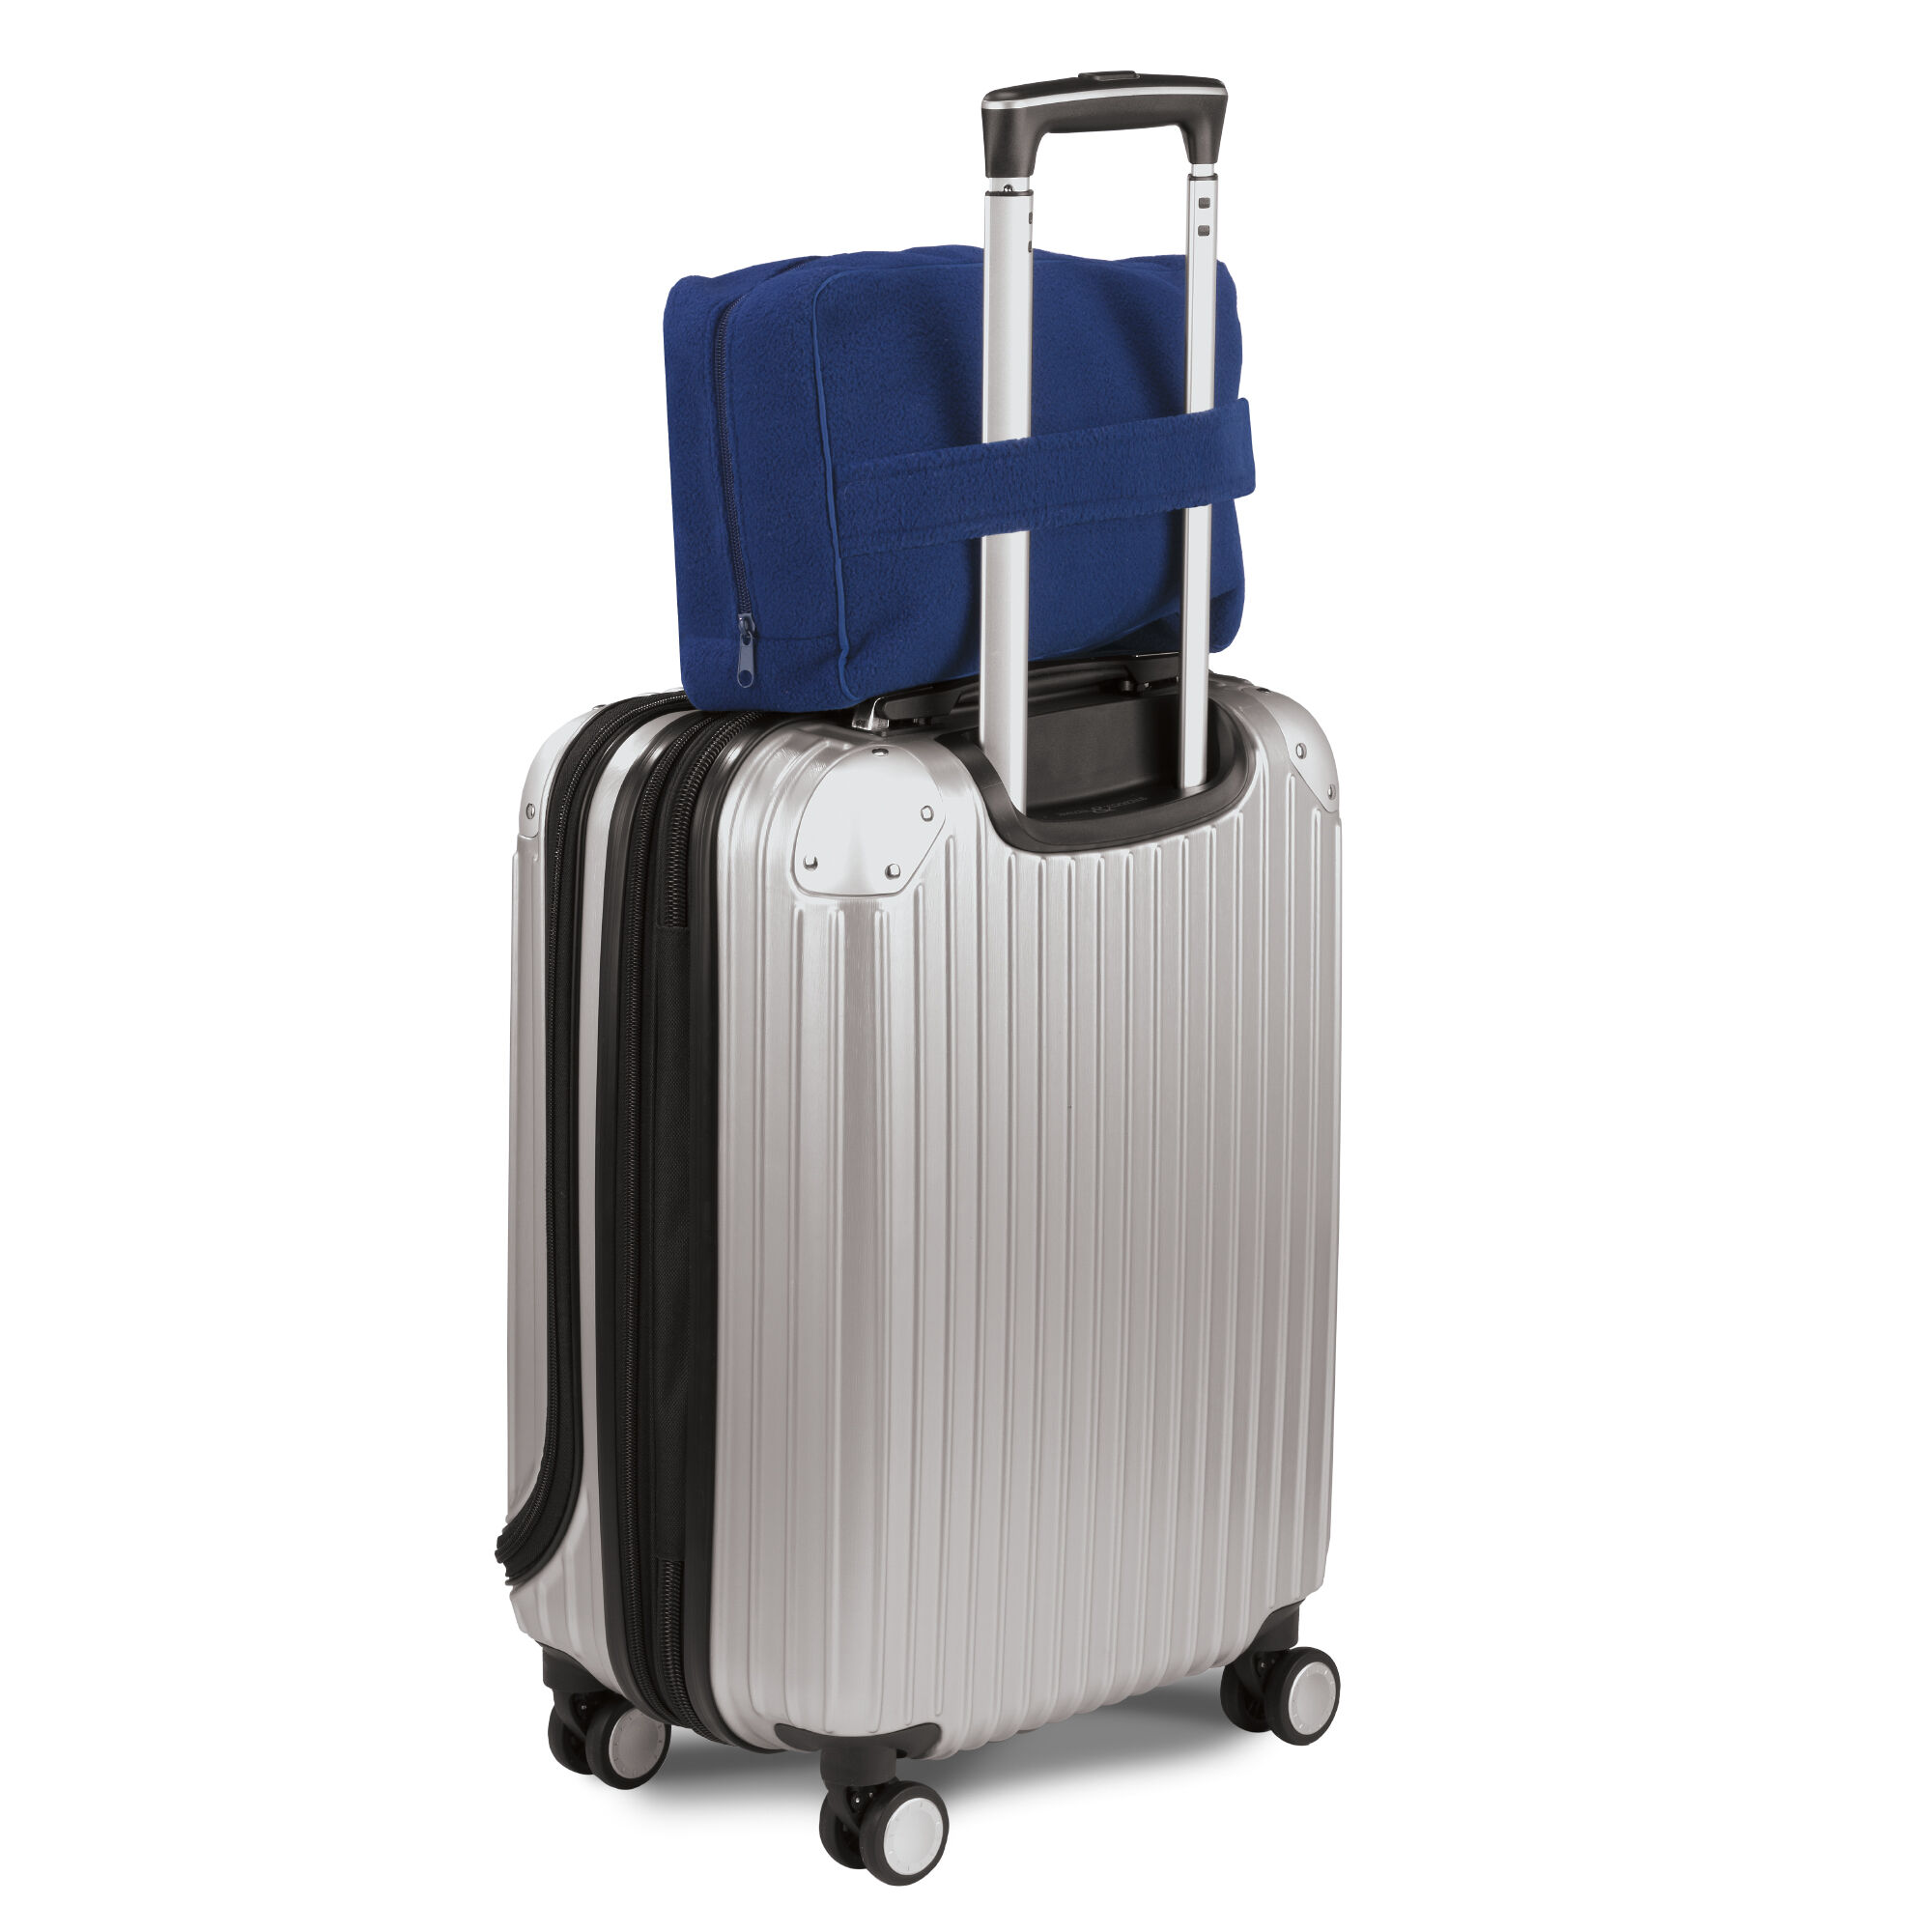 The Personalized Travel Set 5164 002 e suitcase